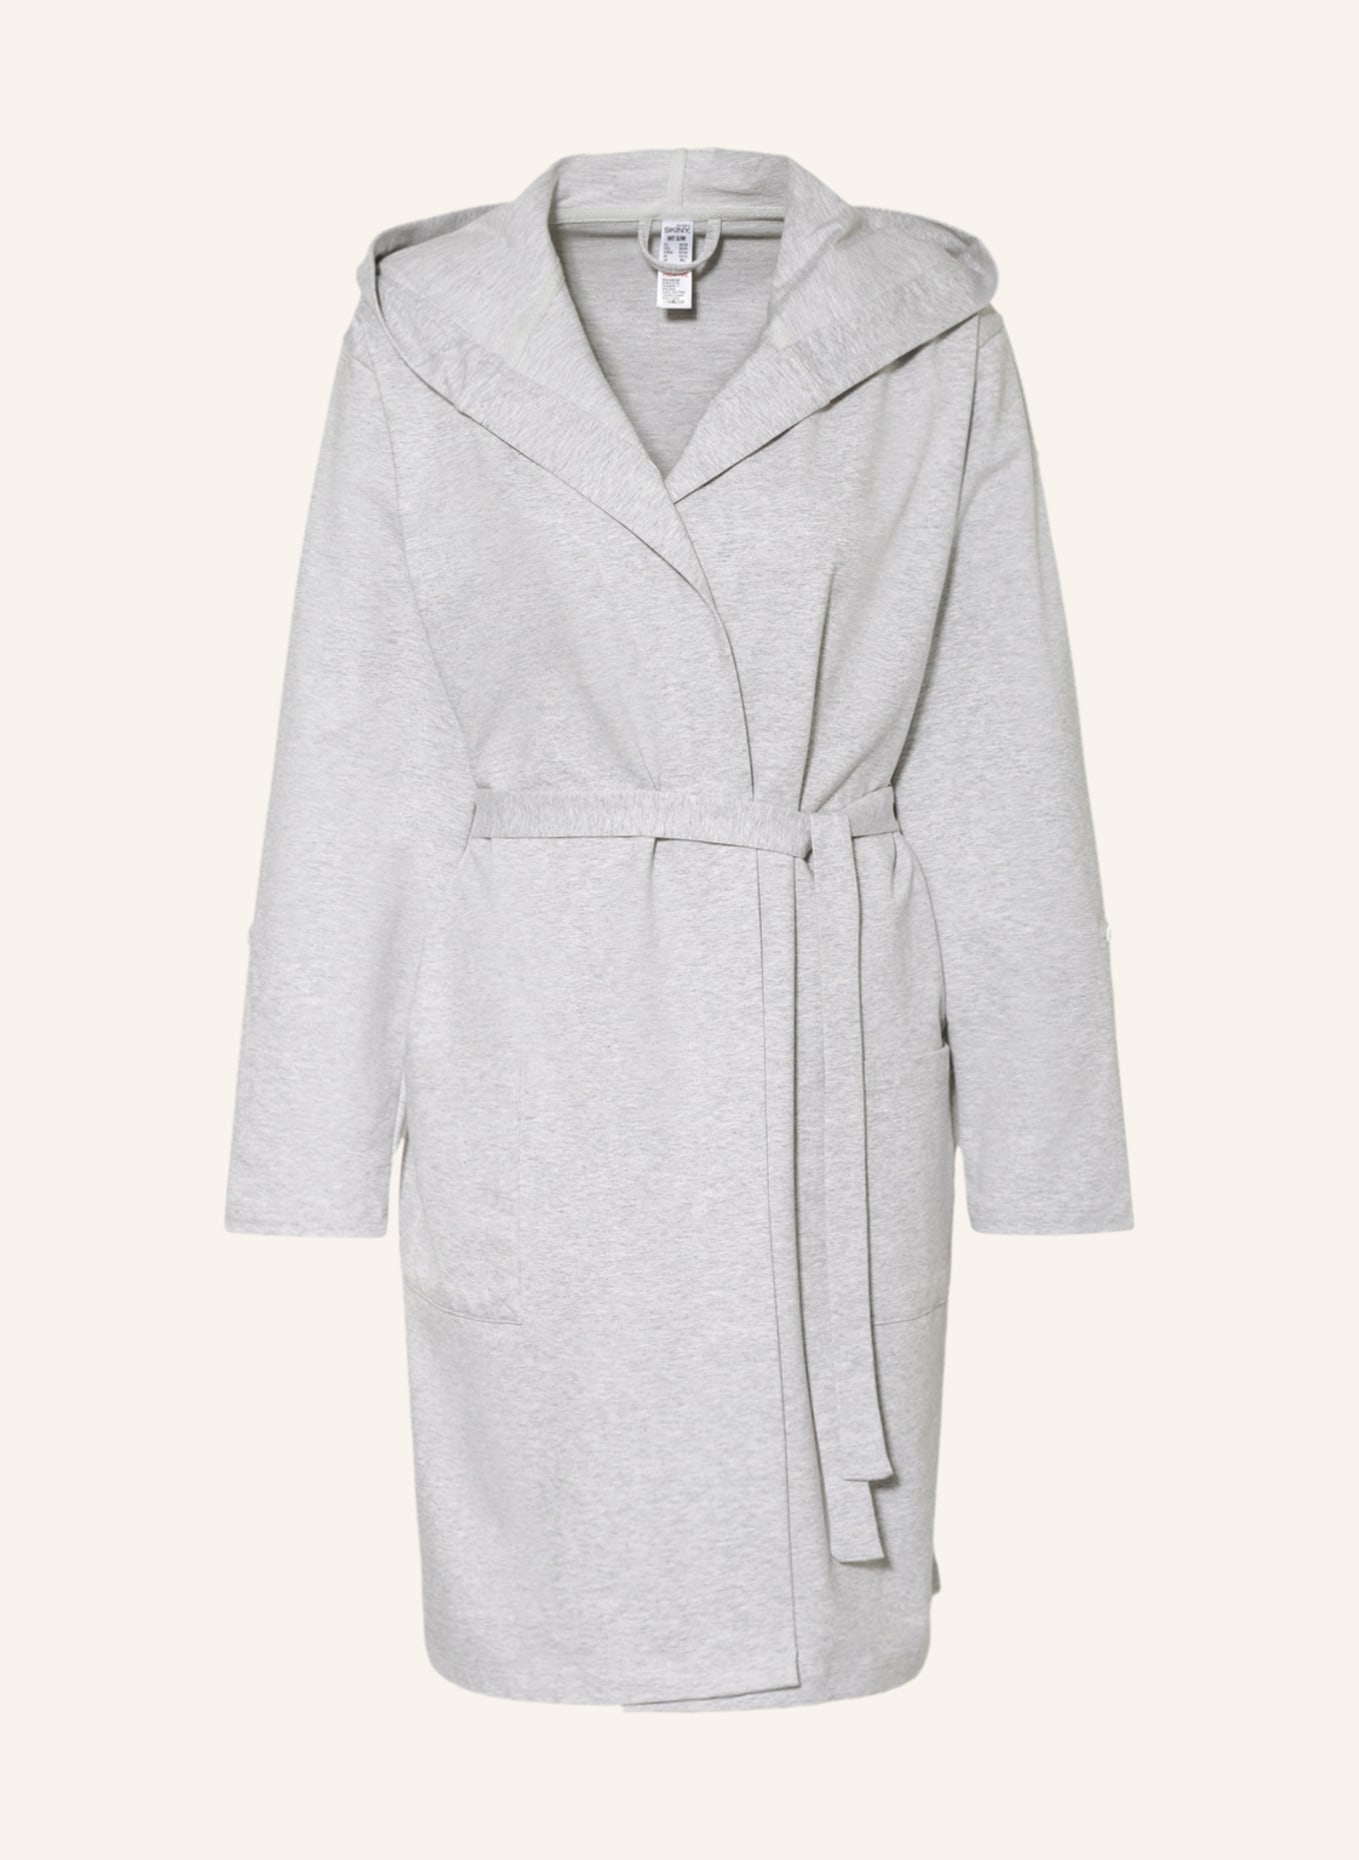 Skiny Women’s bathrobe EVERY NIGHT IN MIX & MATCH, Color: LIGHT GRAY (Image 1)